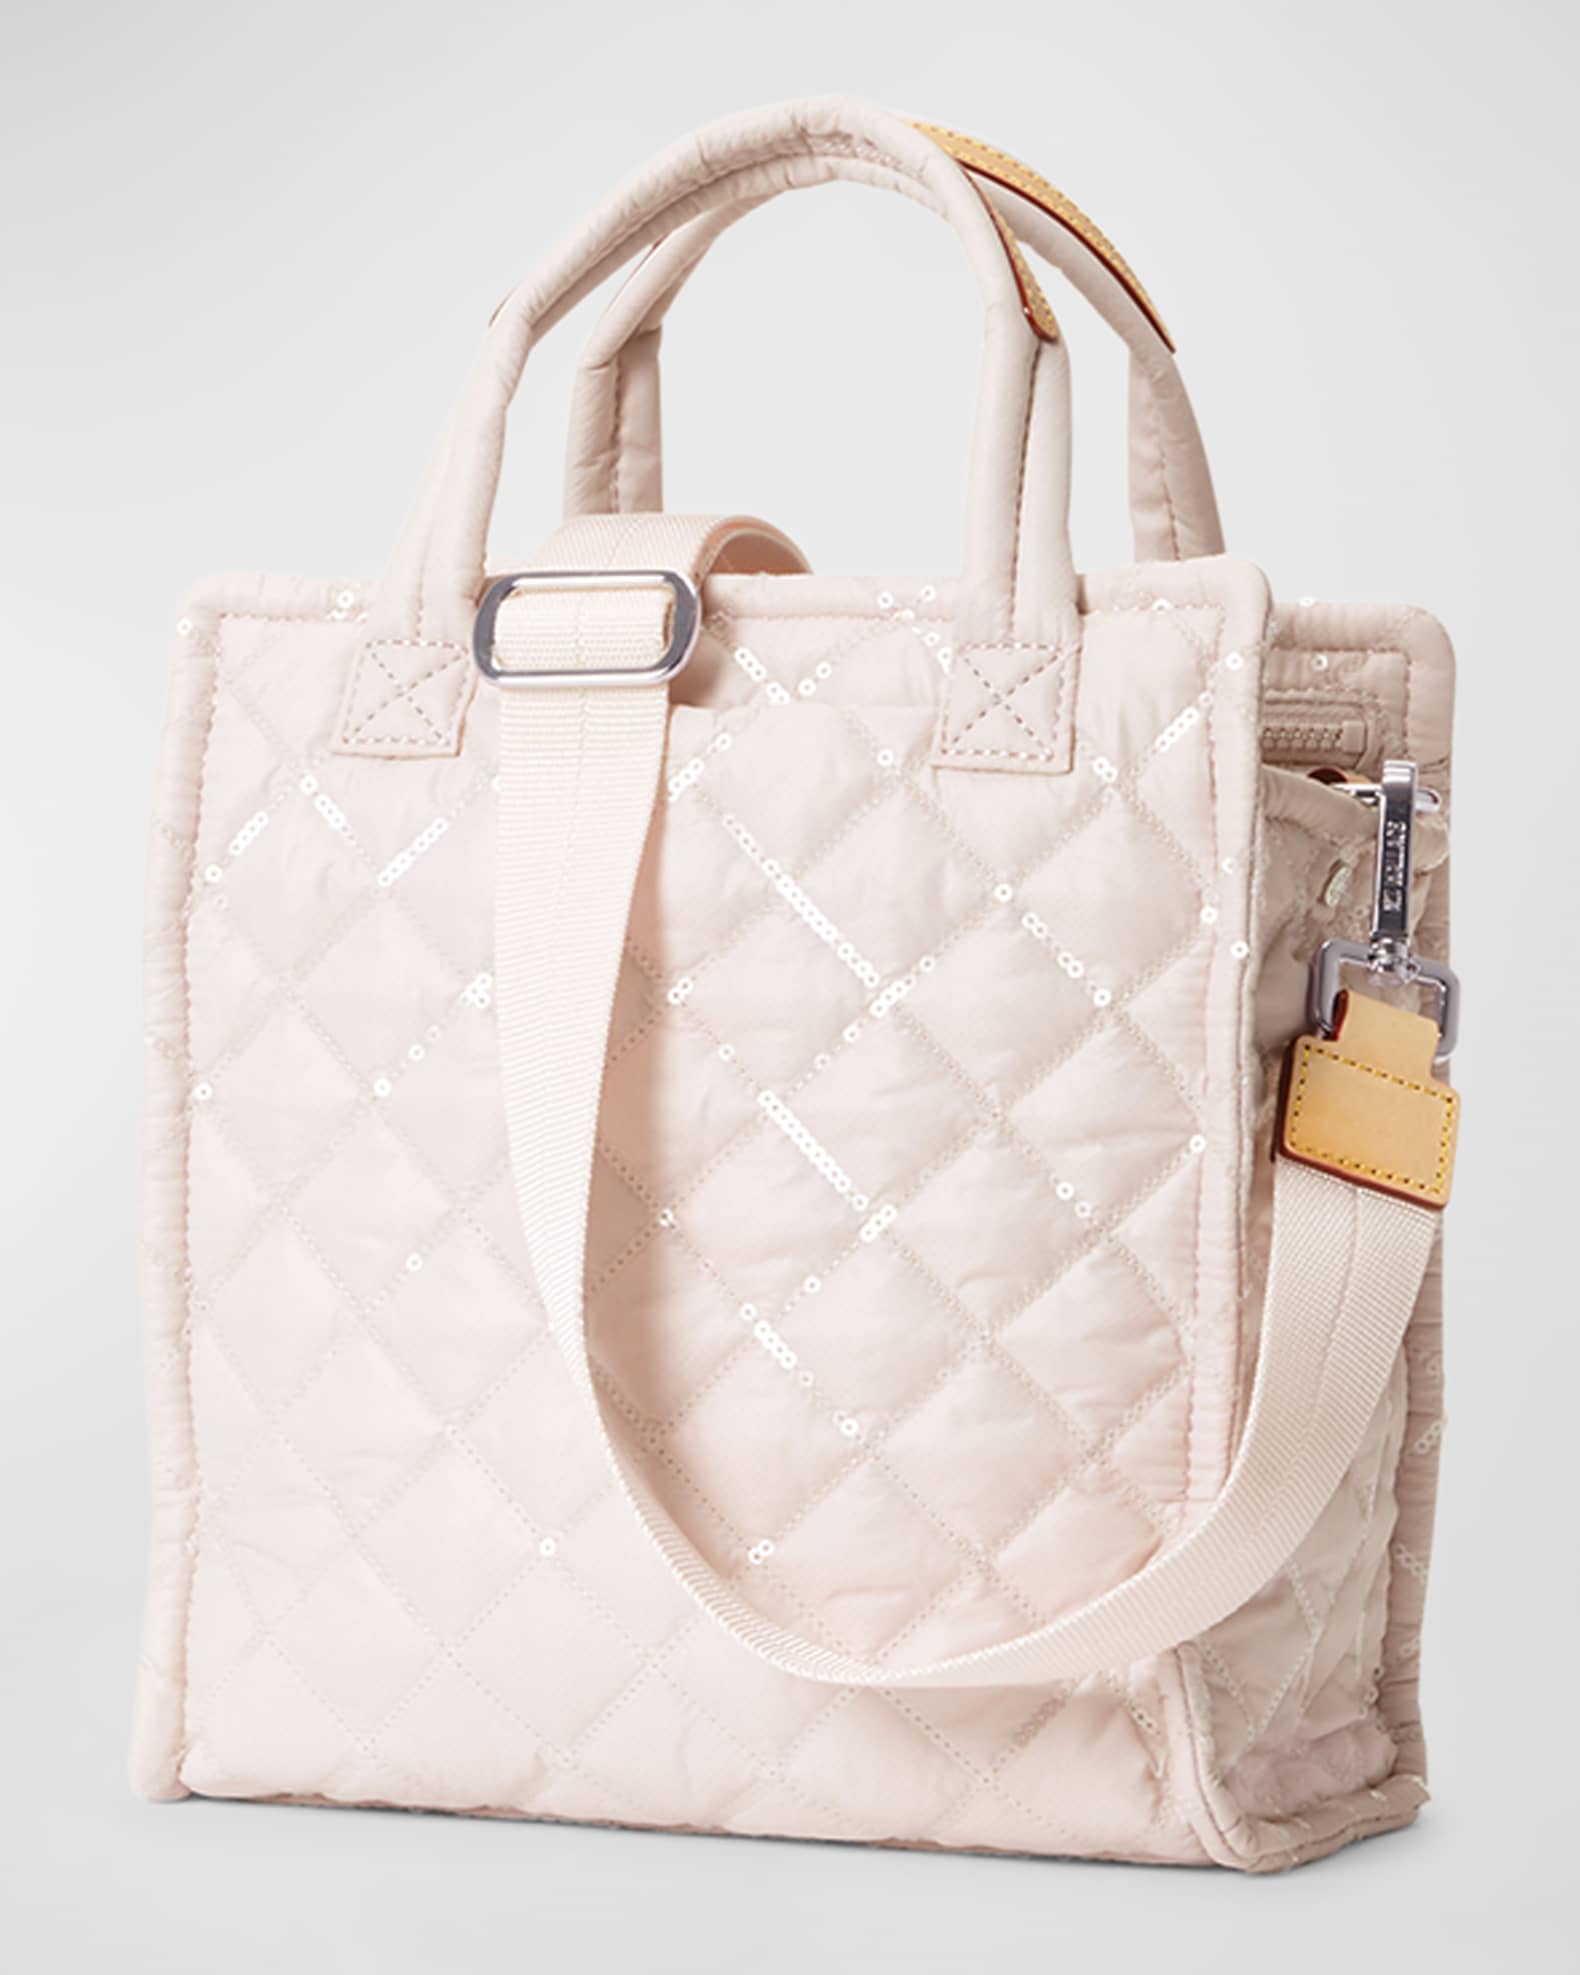 MZ WALLACE Mini Sequin Quilted Box Tote Bag | Neiman Marcus